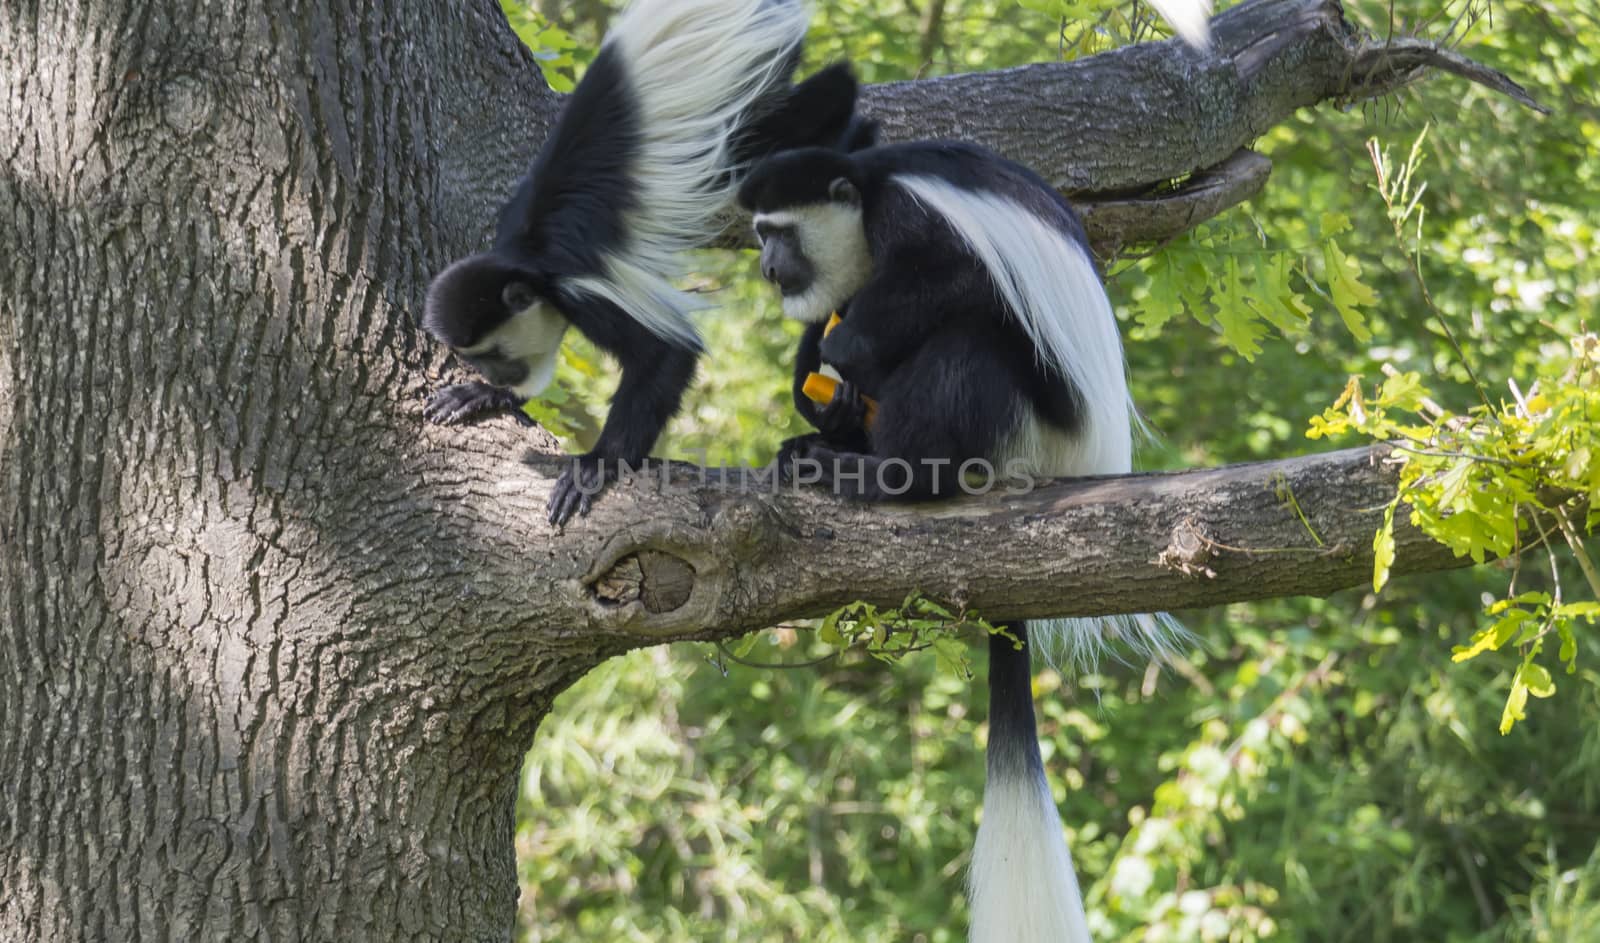 couple of young Mantled guereza monkey also named Colobus guereza eating fruits sitting on tree branch, natural sunlight, copy space by Henkeova